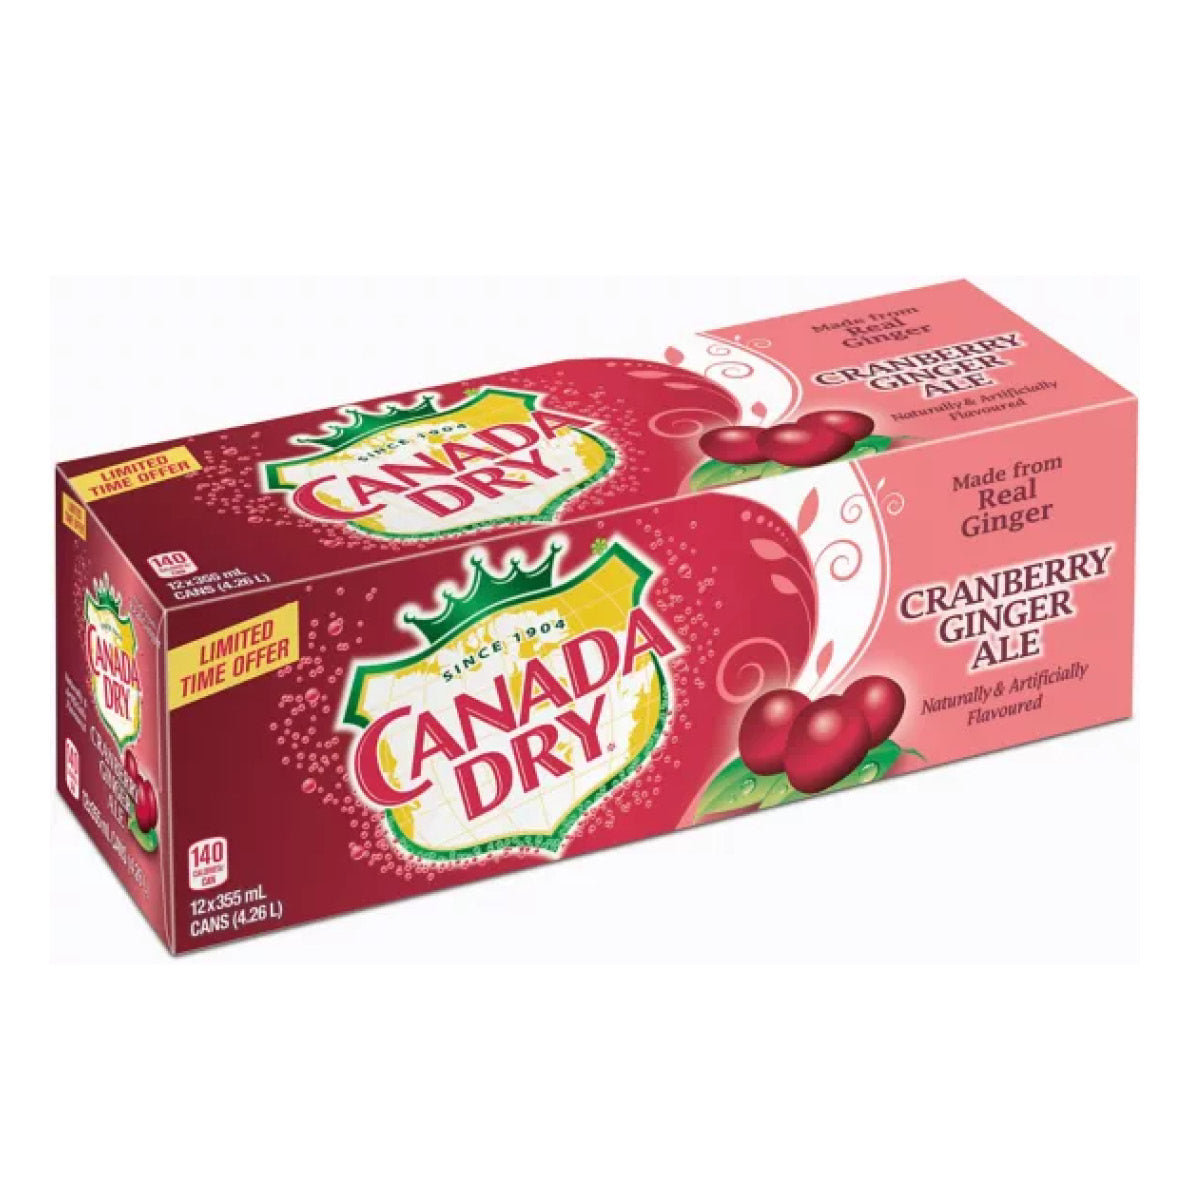 Canada Dry Cranberry Gingerale, 12 pack